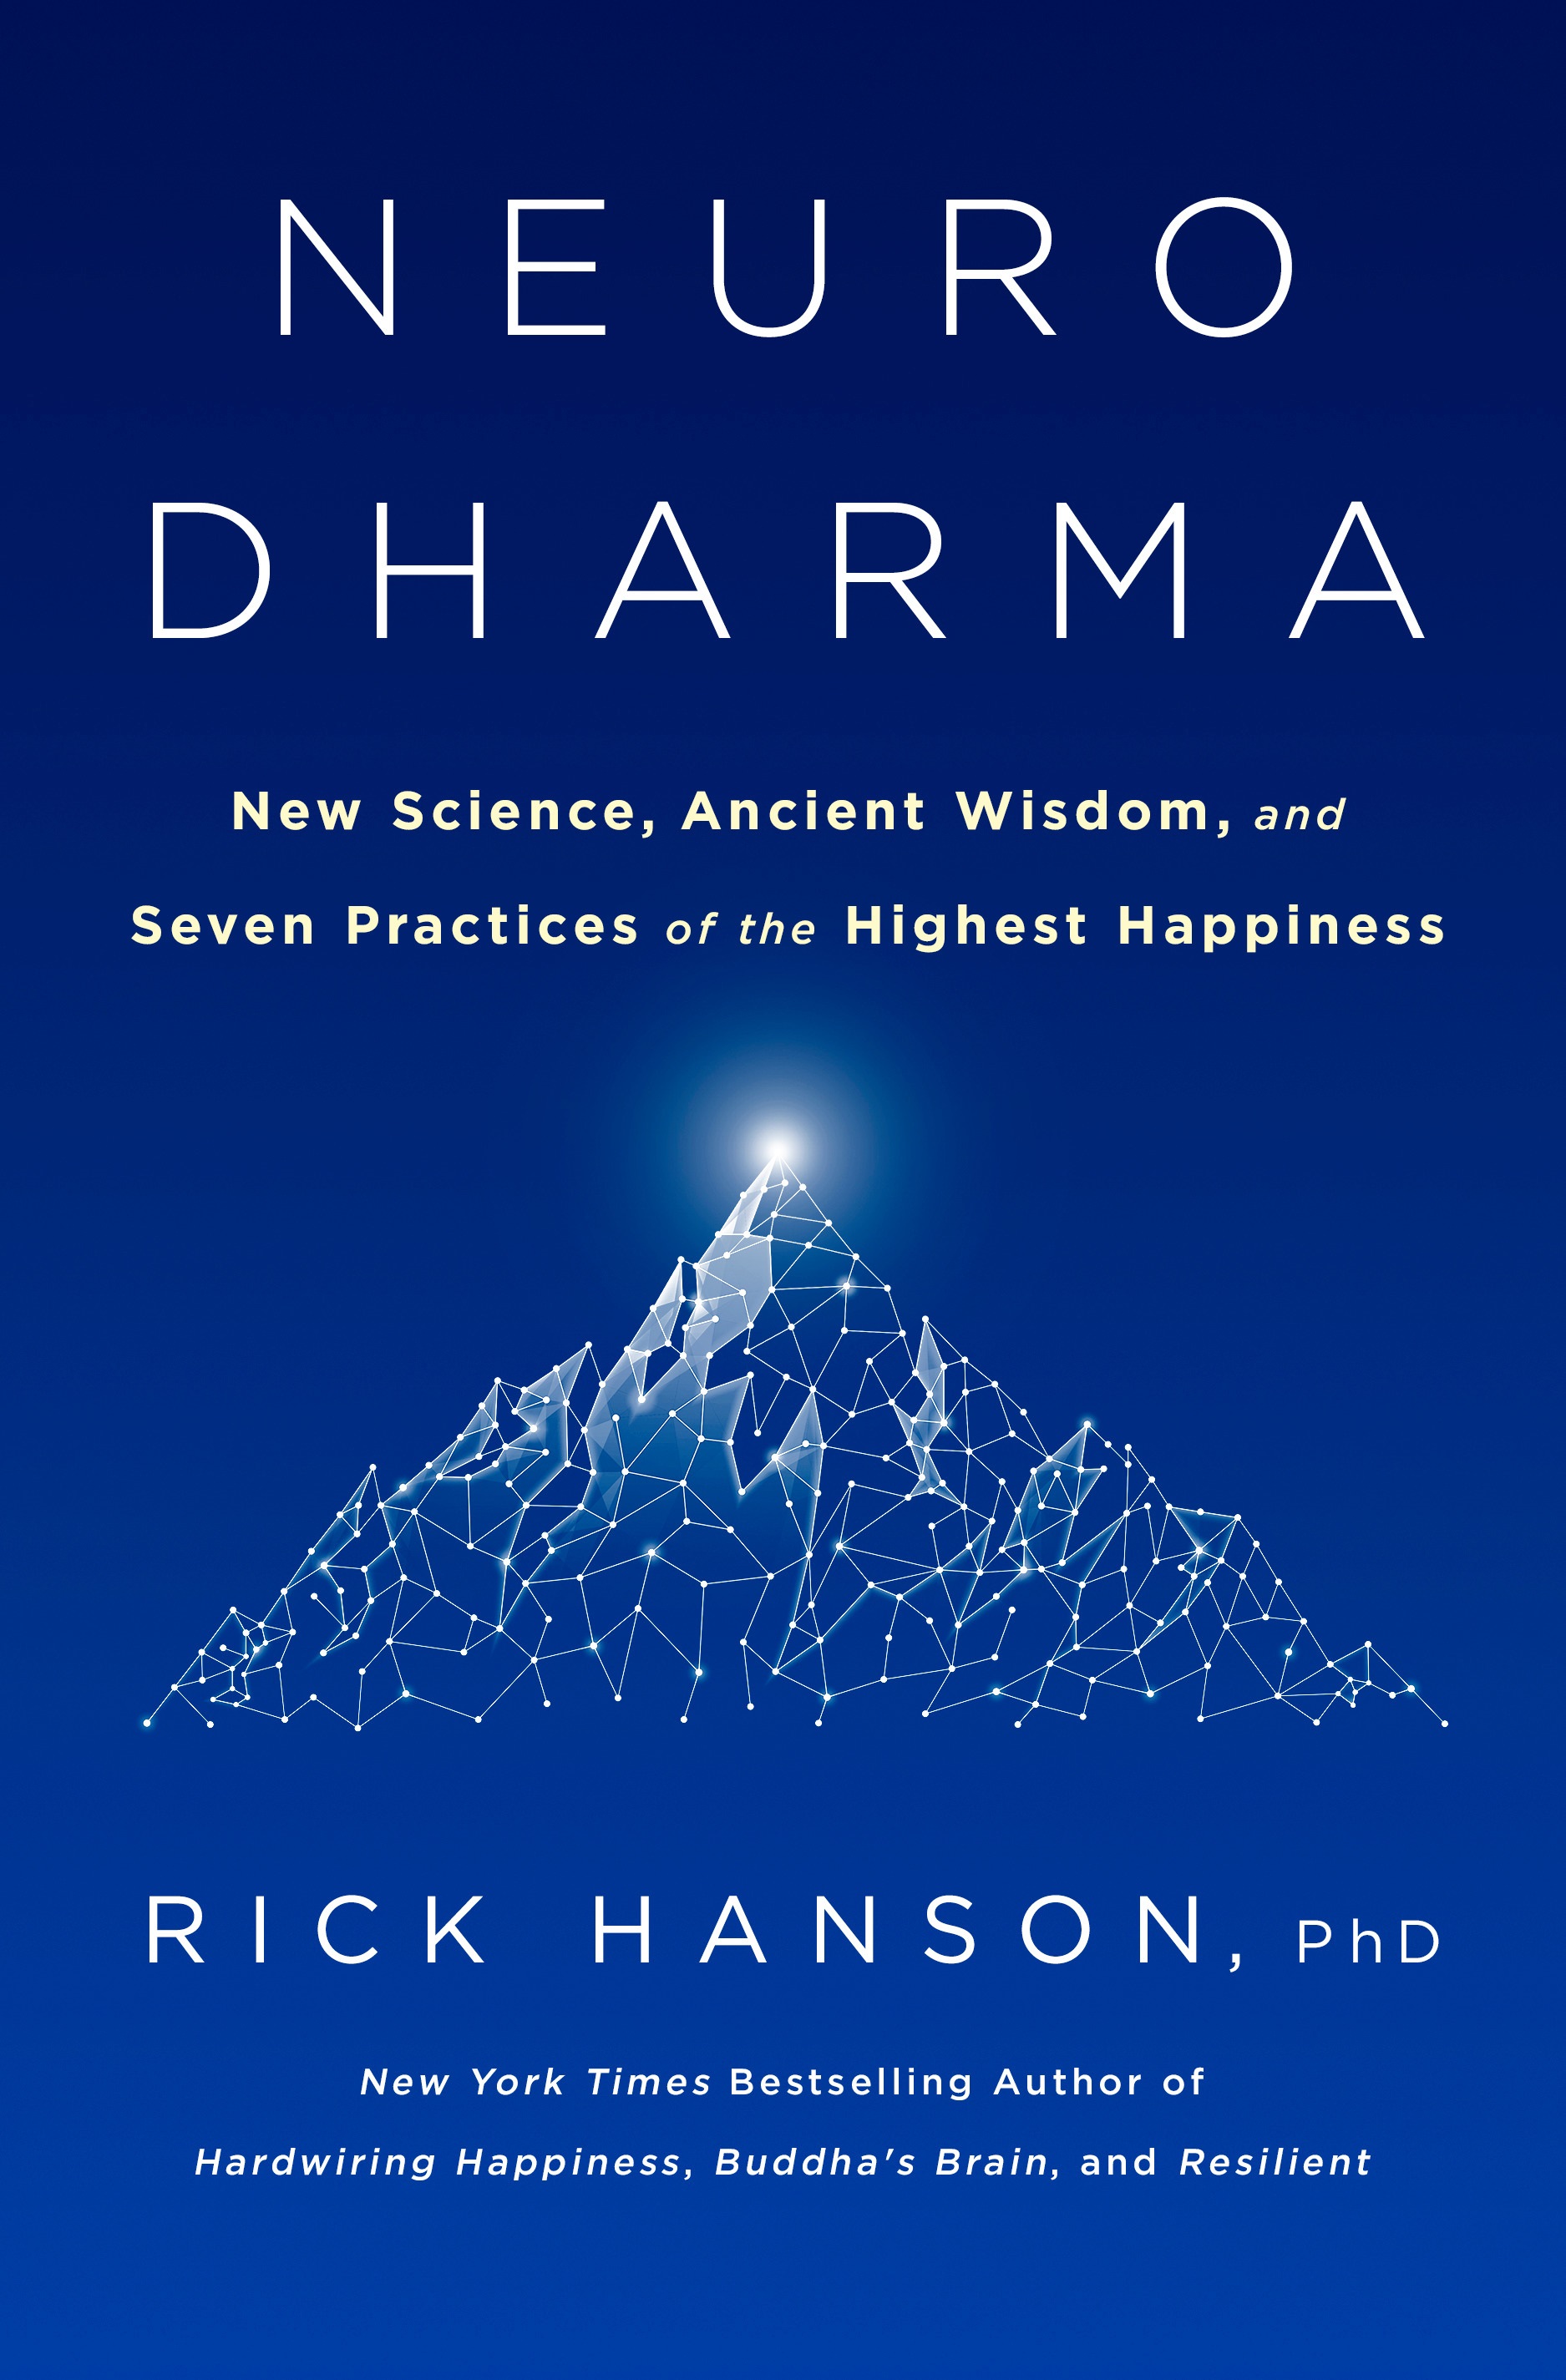 NEURODHARMA: New Science, Ancient Wisdom, and Seven Practices of the Highest Happiness by Rick Hanson, PhD.